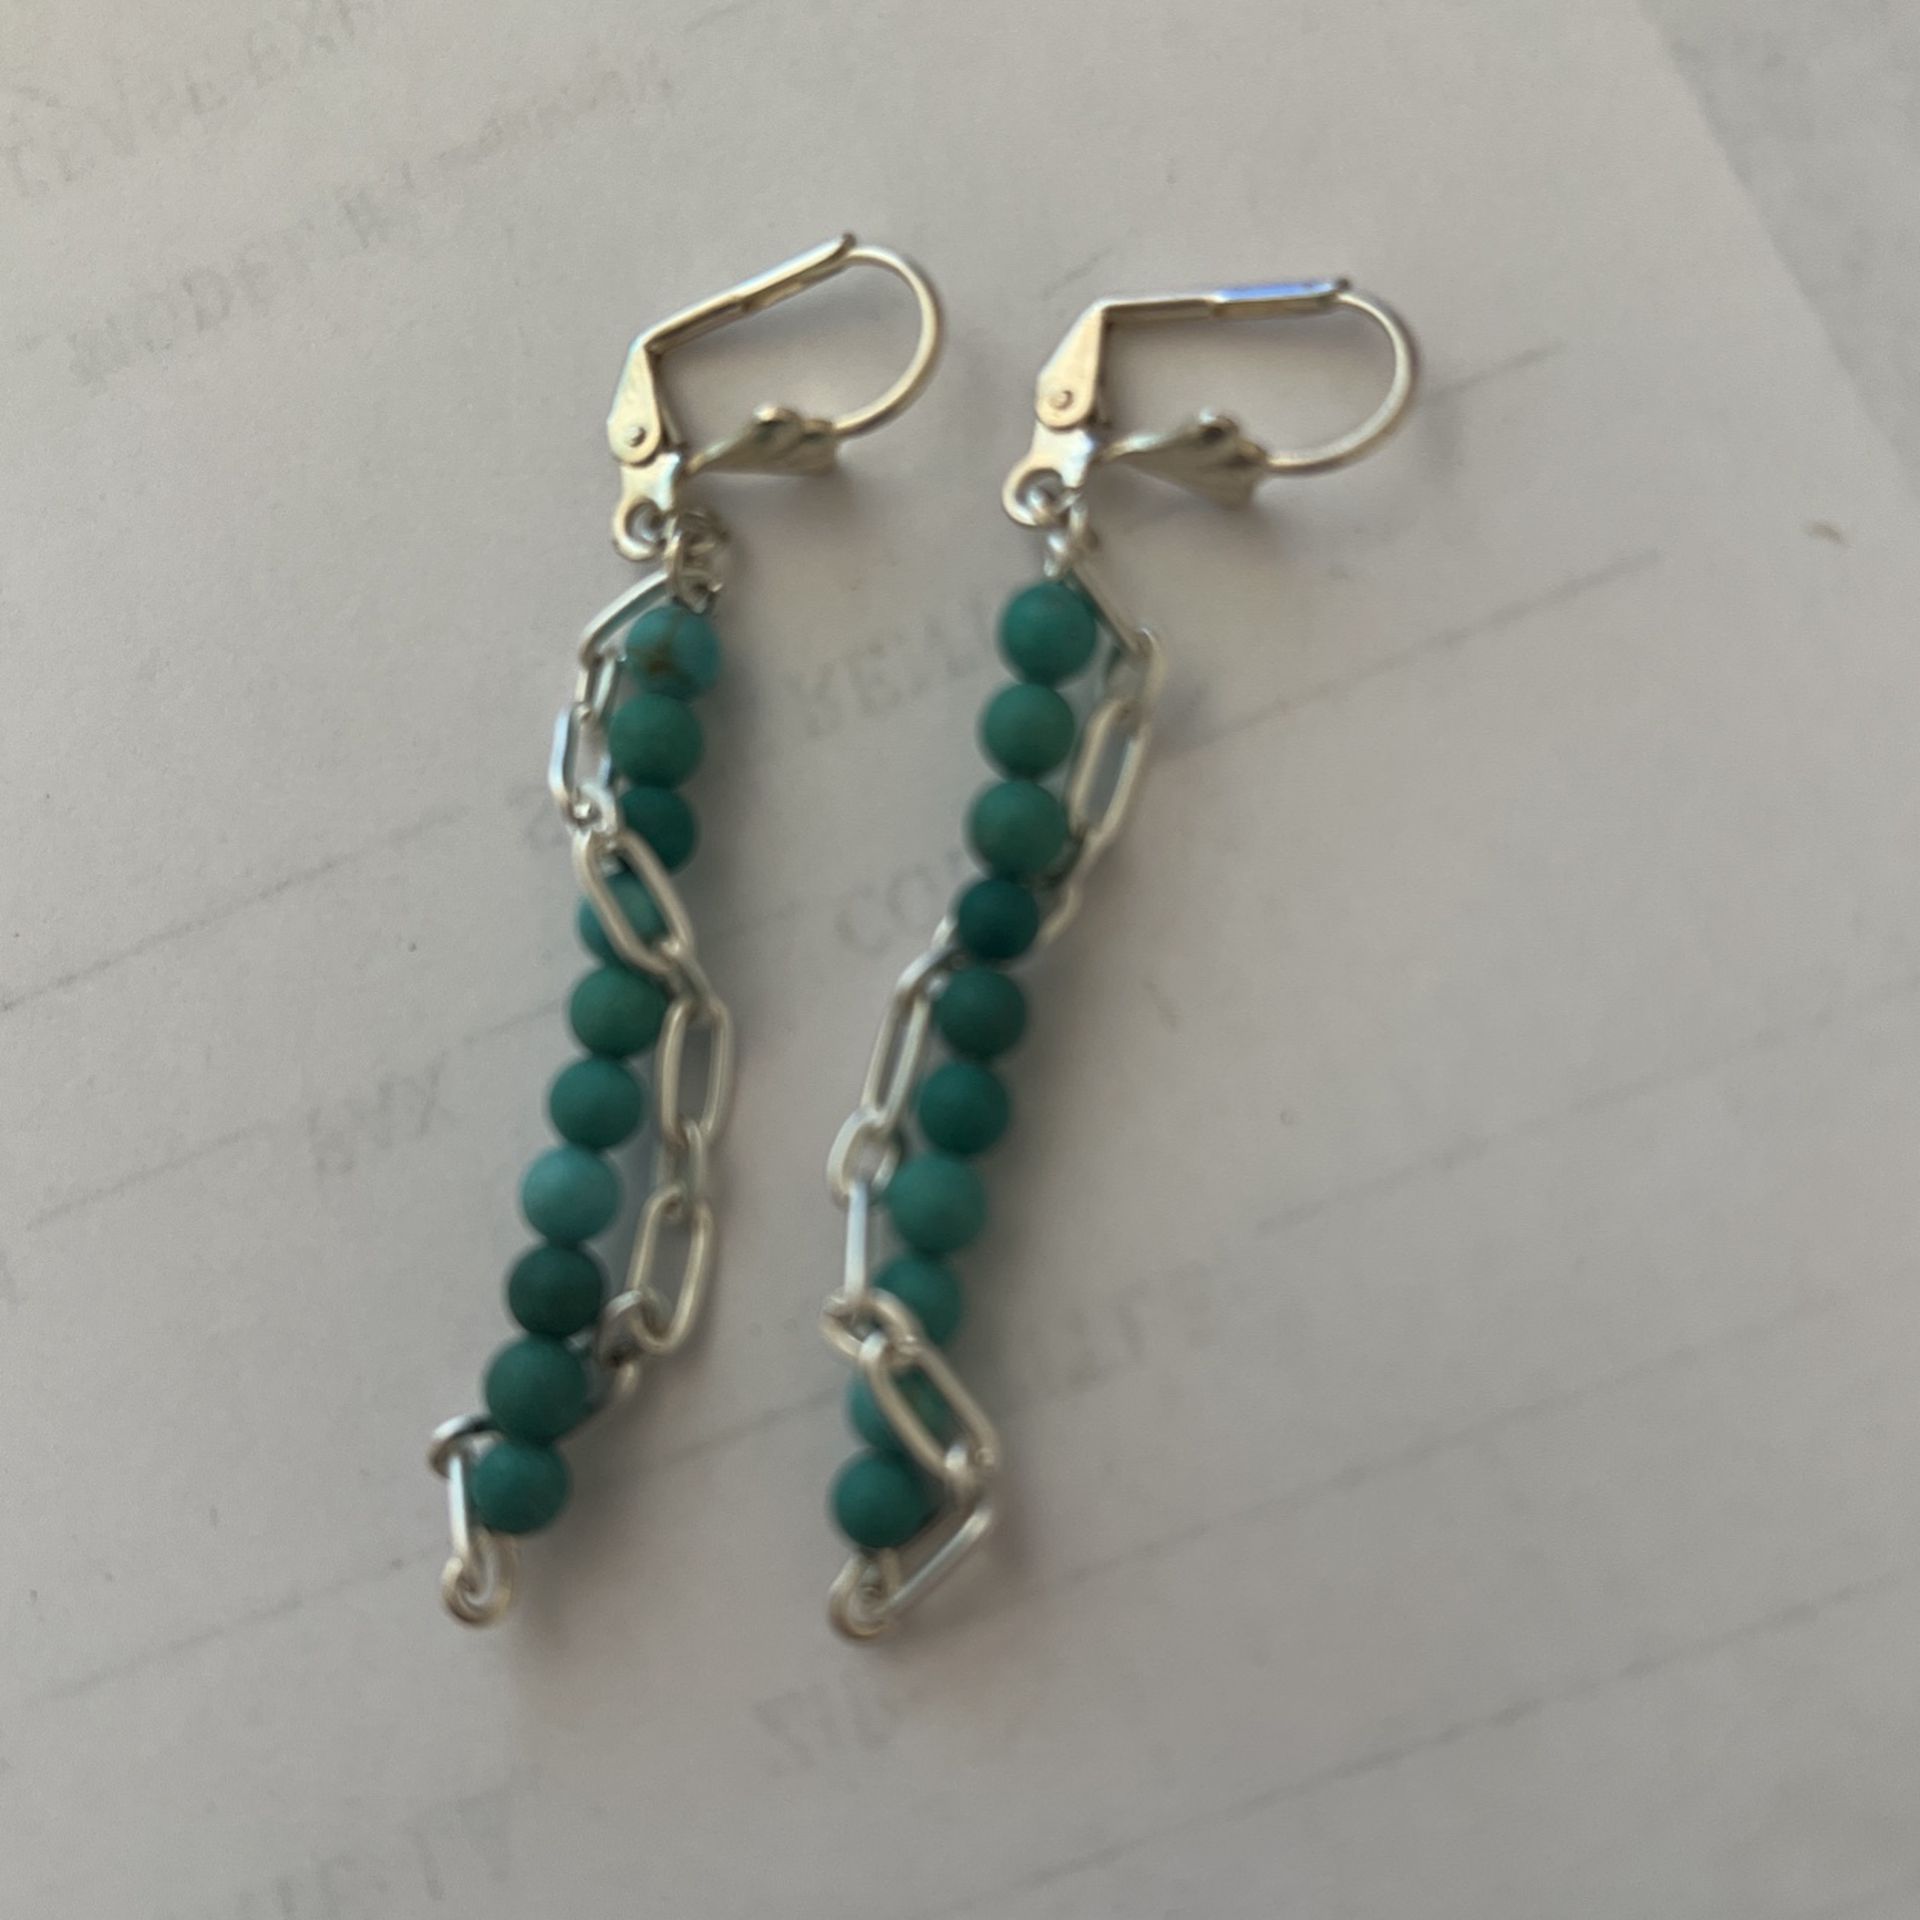 GENUINE TURQUOISE CHAINMAIL EARRINGS STERLING SILVER HOOKS